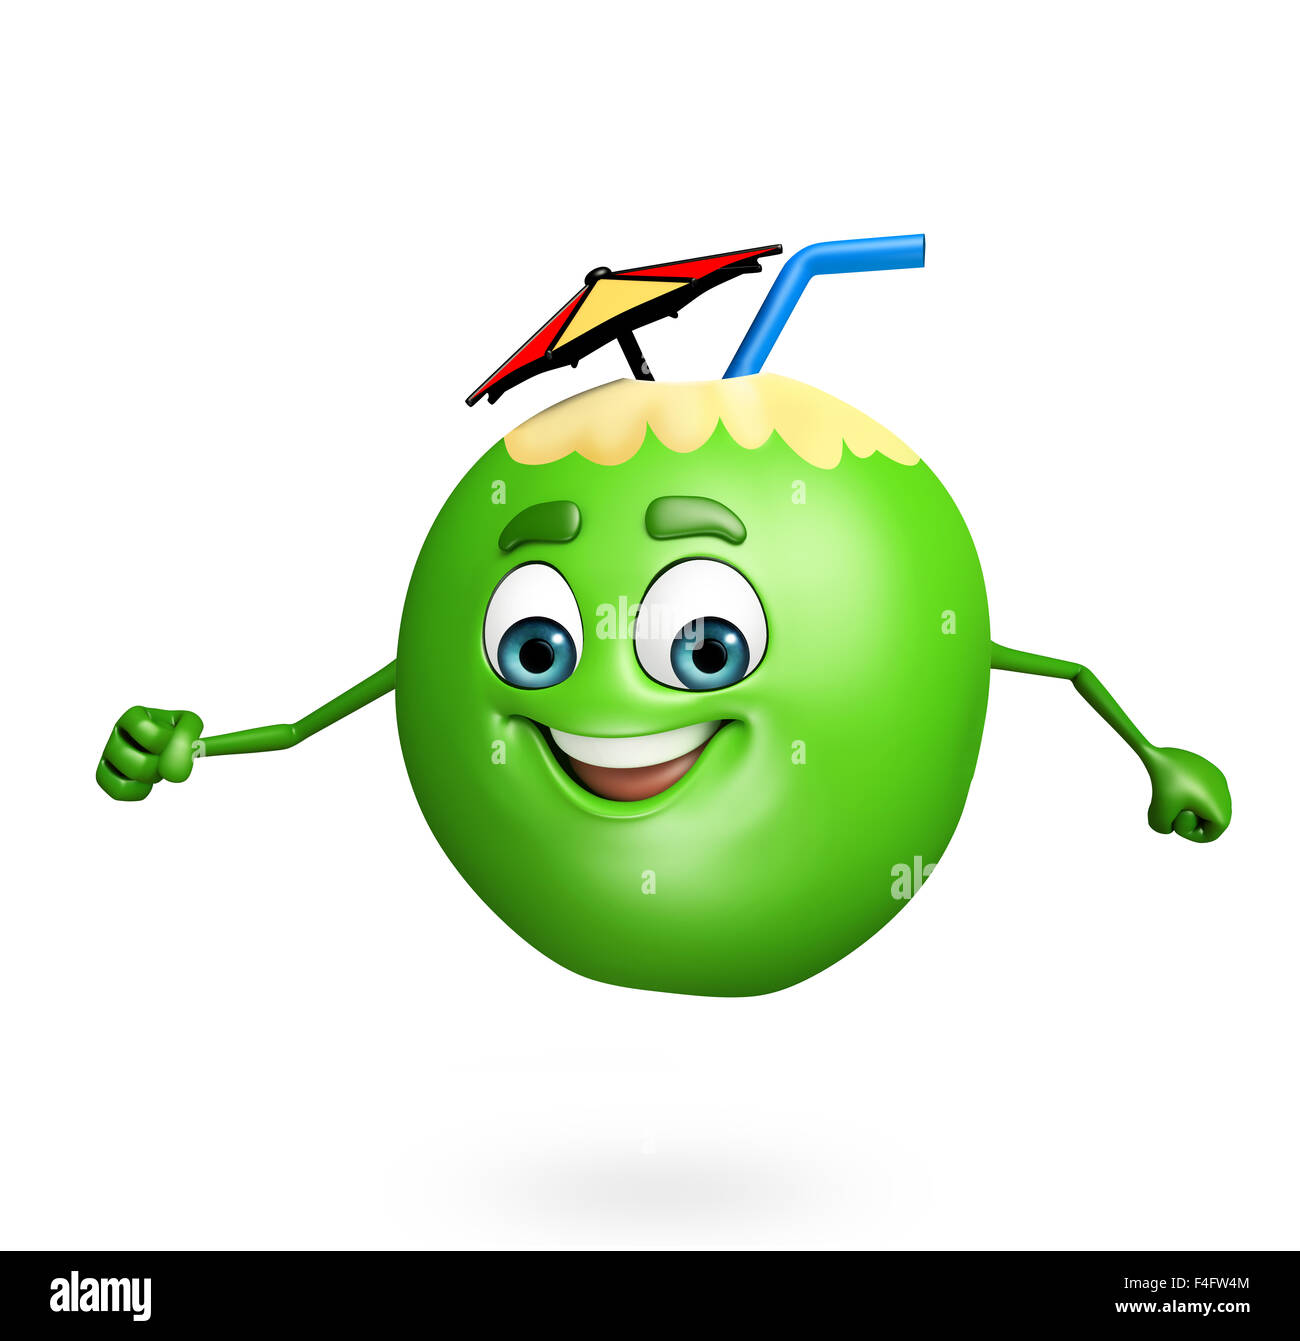 3d rendered illustration of coconut cartoon character Stock Photo - Alamy